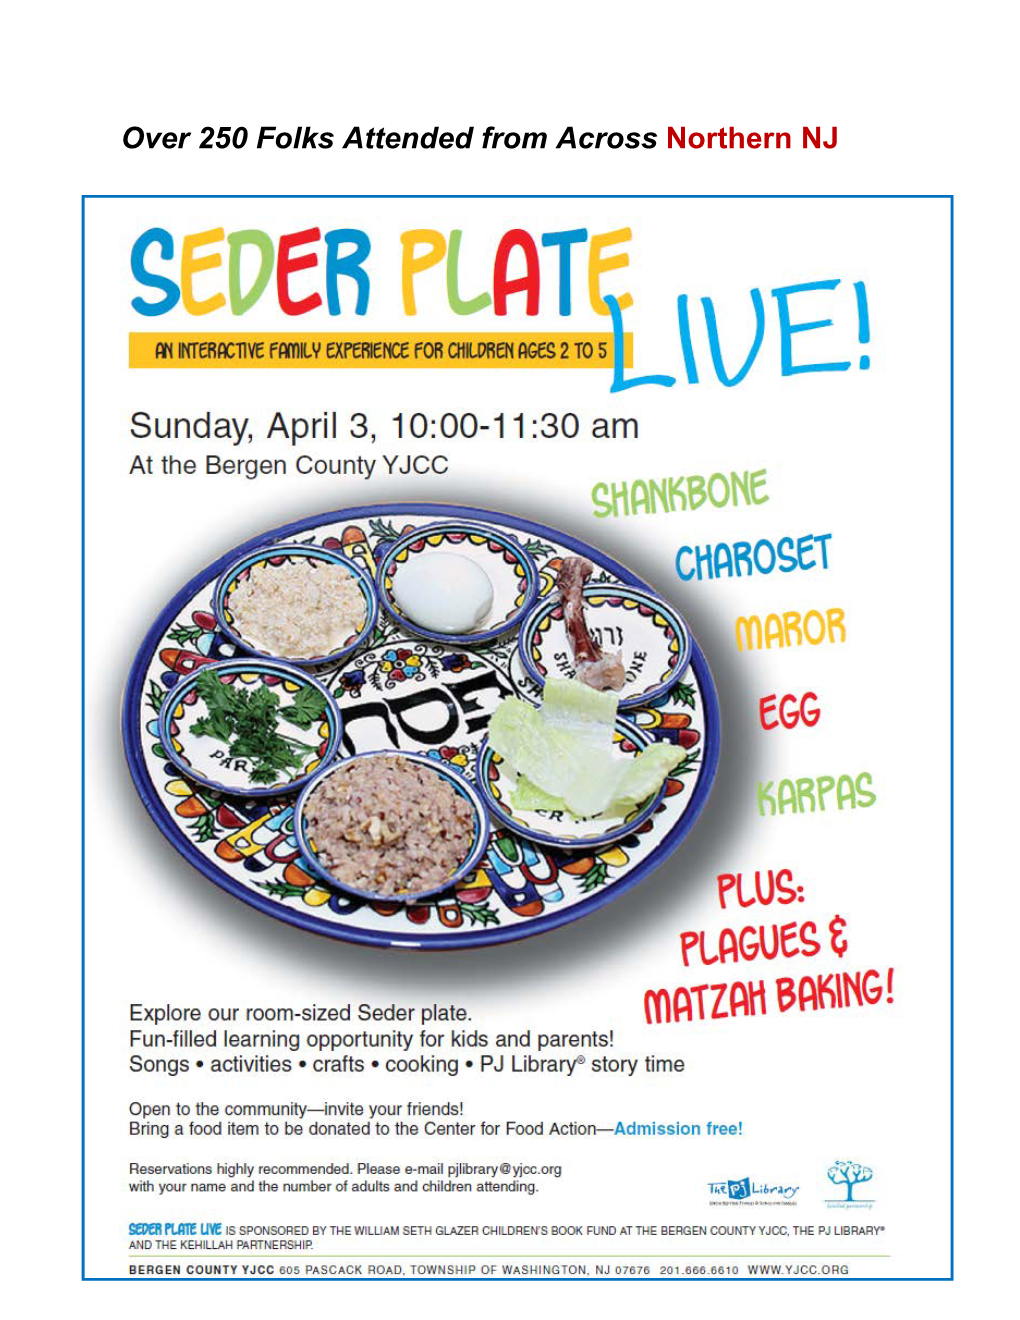 Instructions for Activity Centers at Seder Plate LIVE!